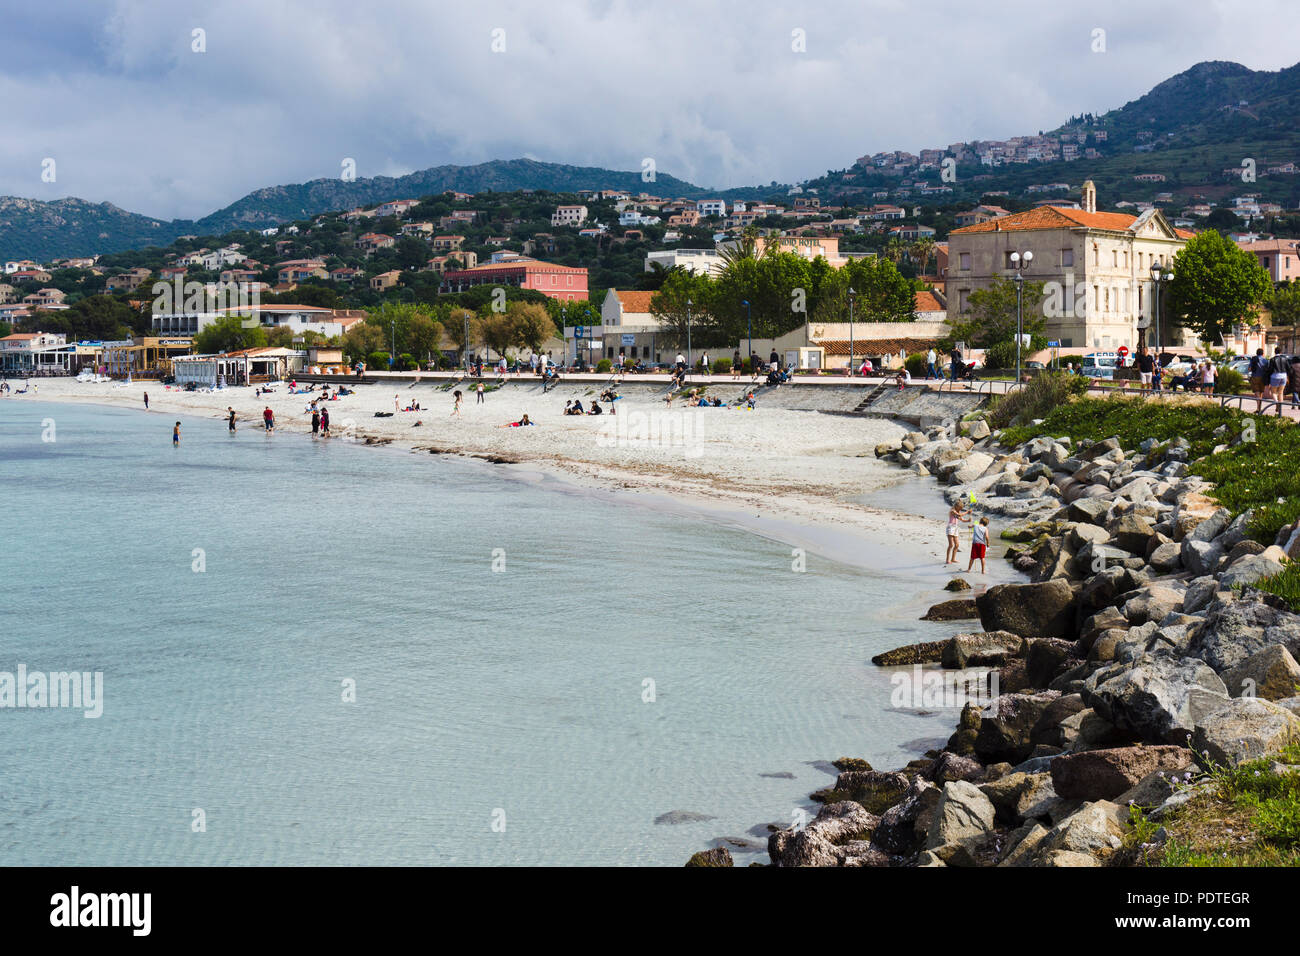 Beach and waterfront, L'Île-Rousse, Corsica, France Stock Photo